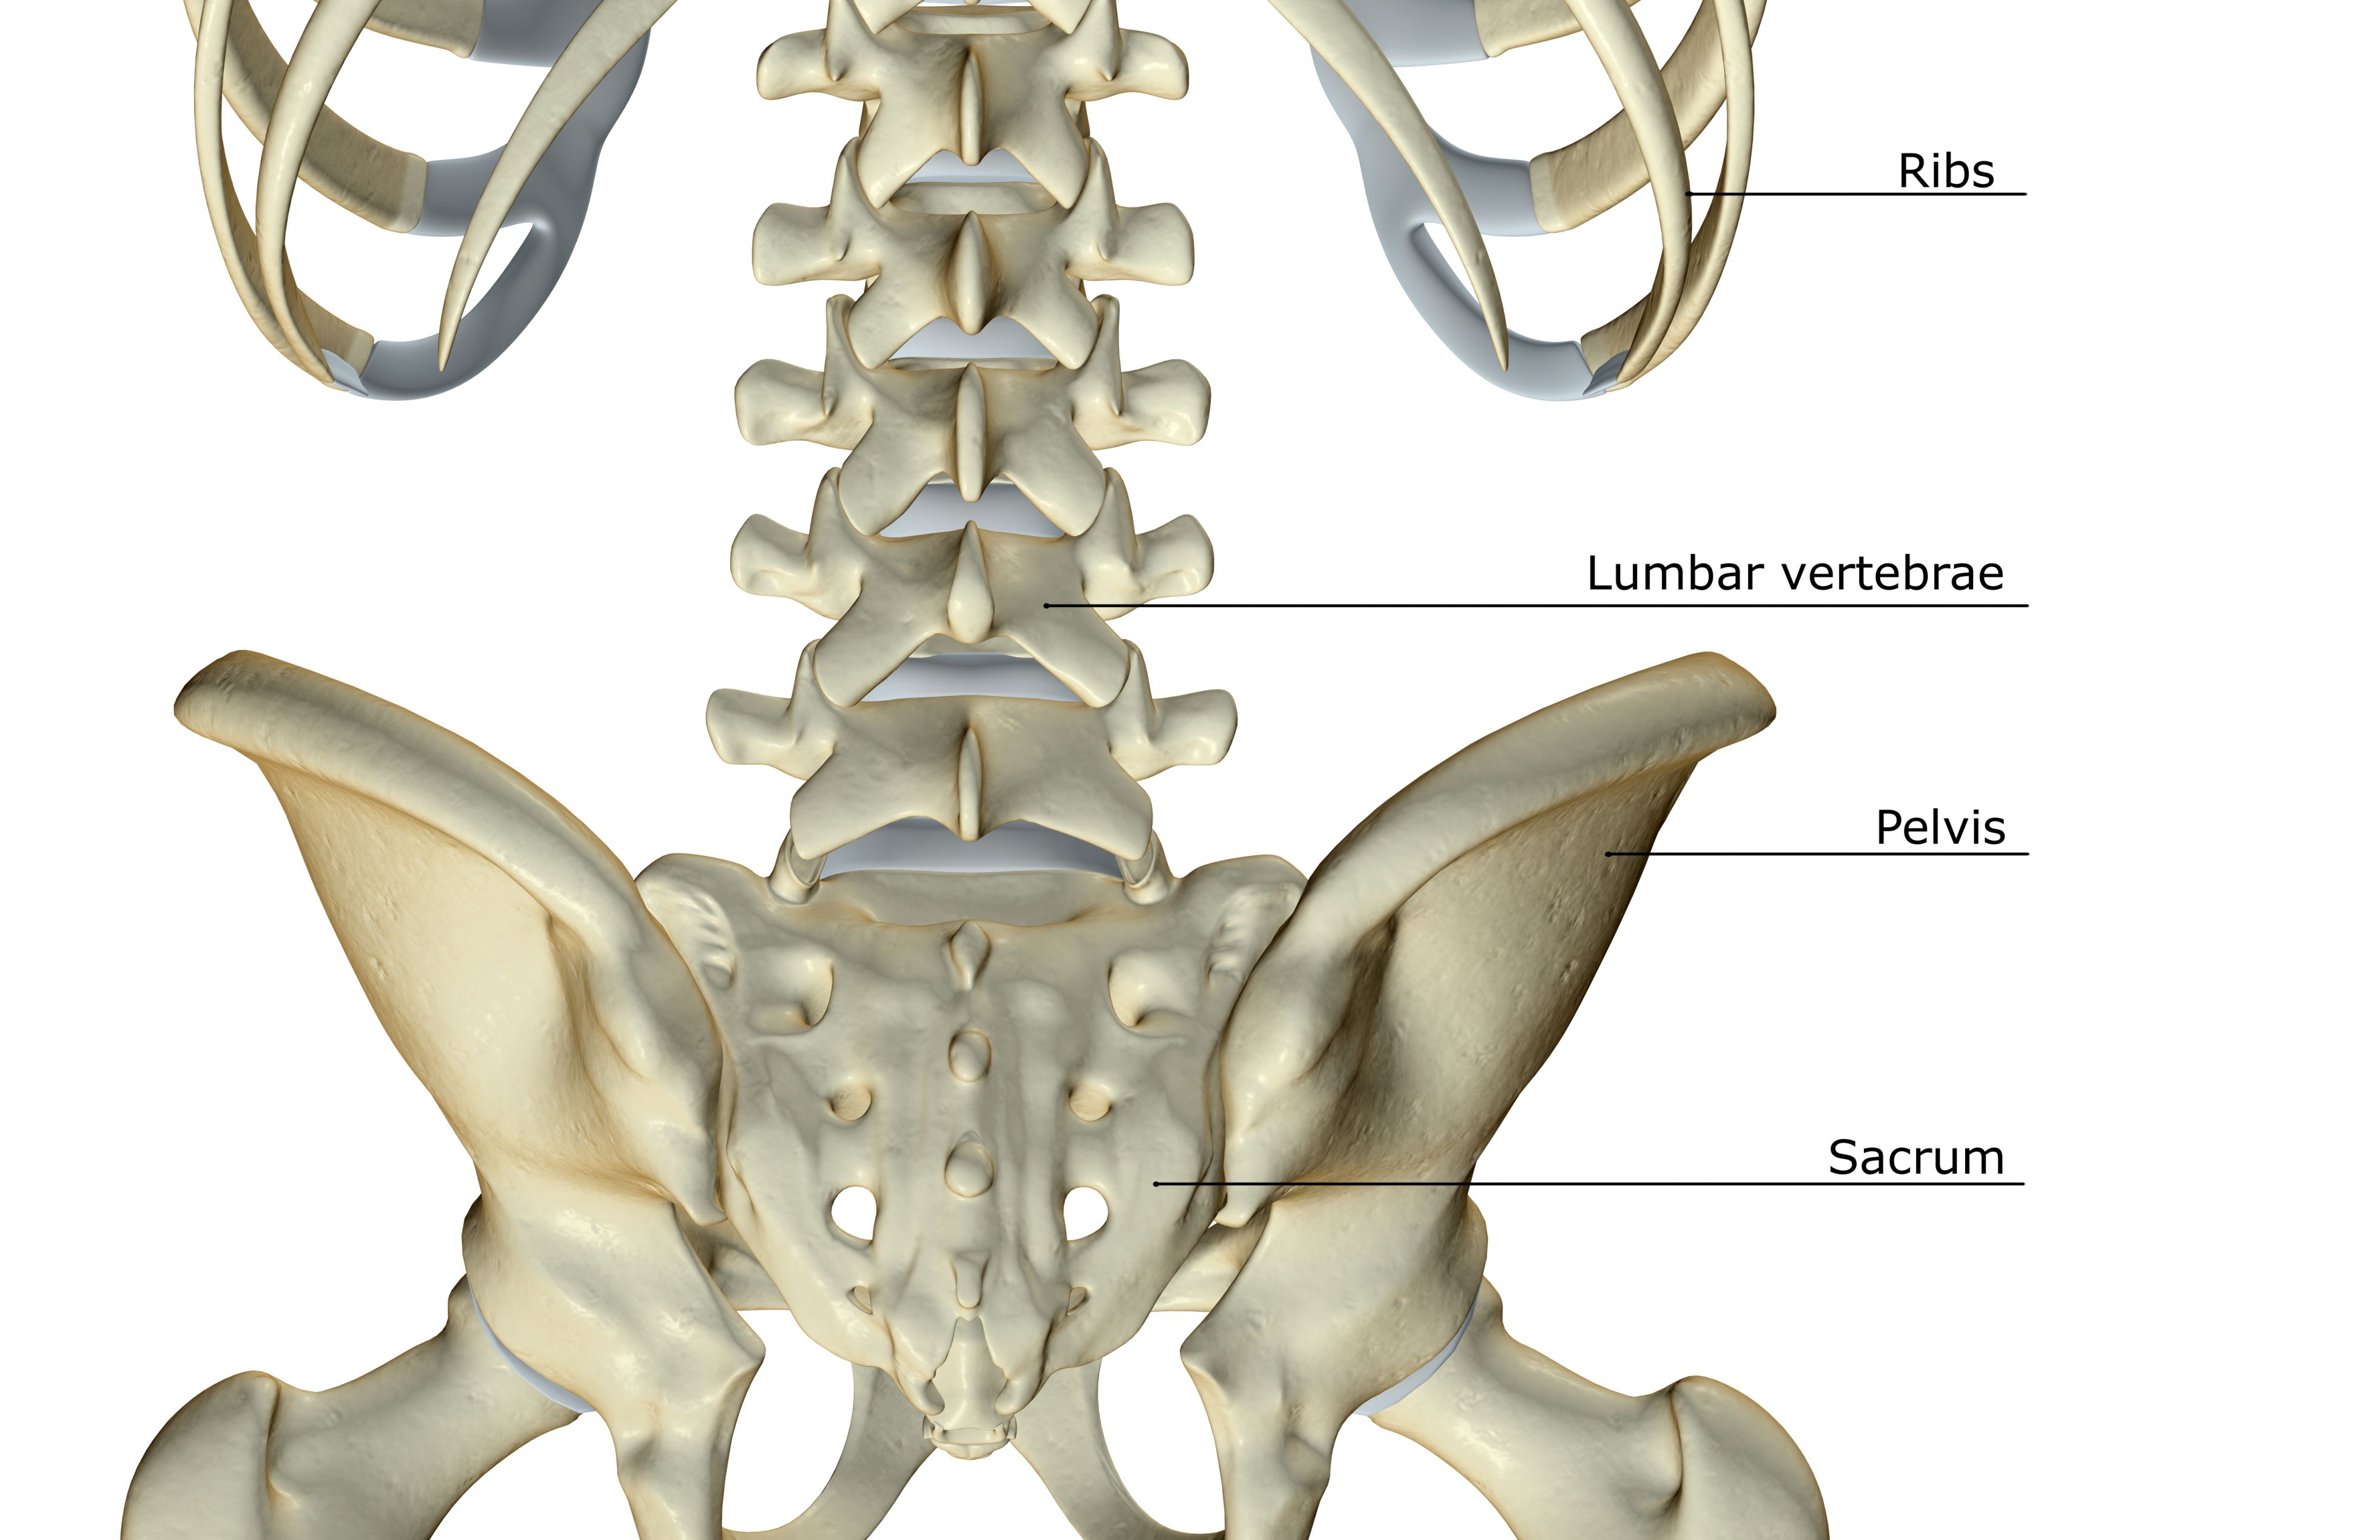 transverse-process-lamina-and-more-spinal-anatomy-for-the-rest-of-us